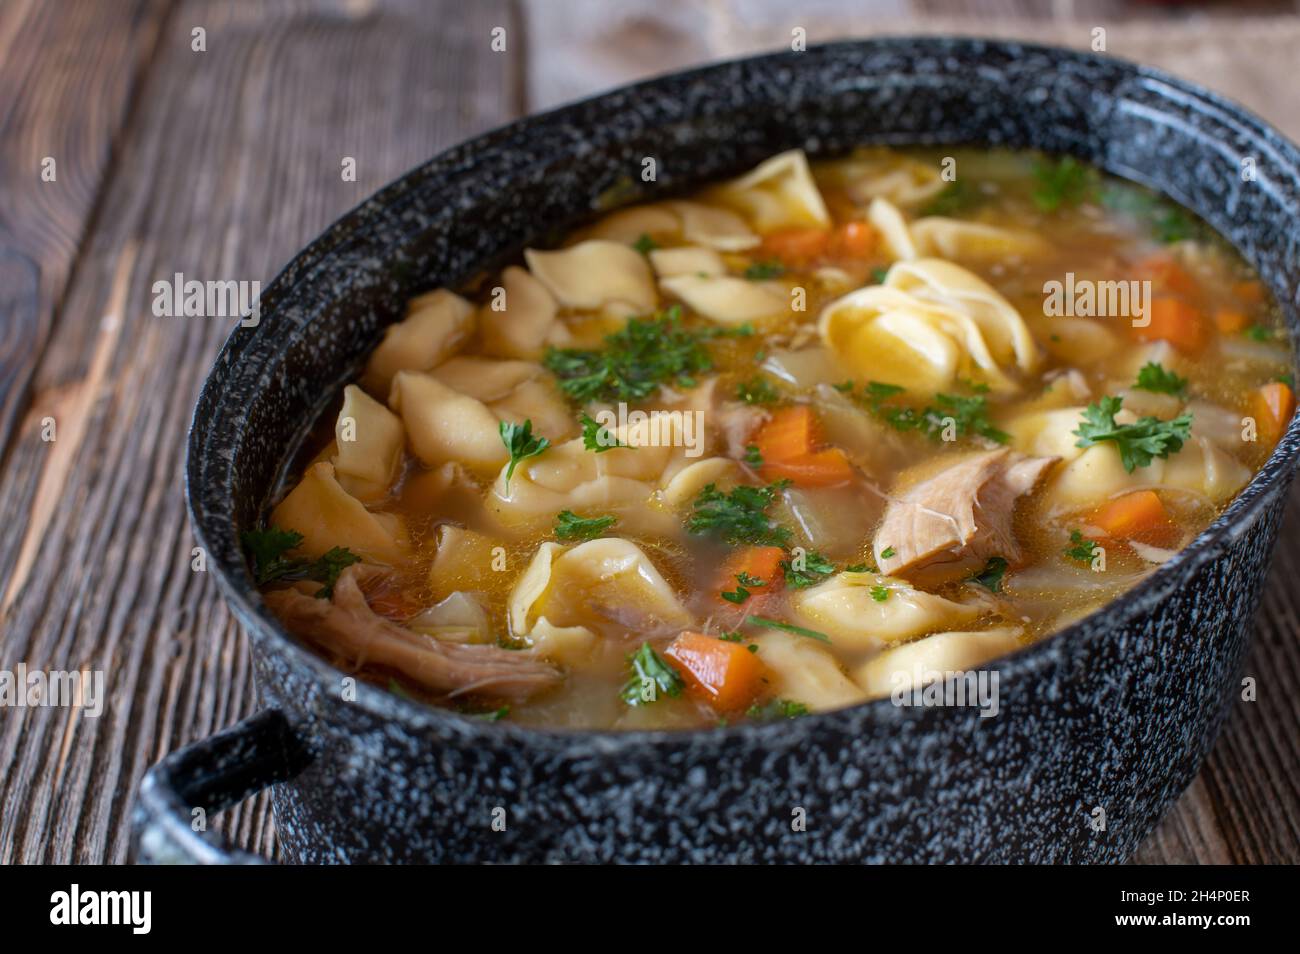 https://c8.alamy.com/comp/2H4P0ER/pot-with-chicken-noodle-soup-isolated-on-wooden-table-2H4P0ER.jpg